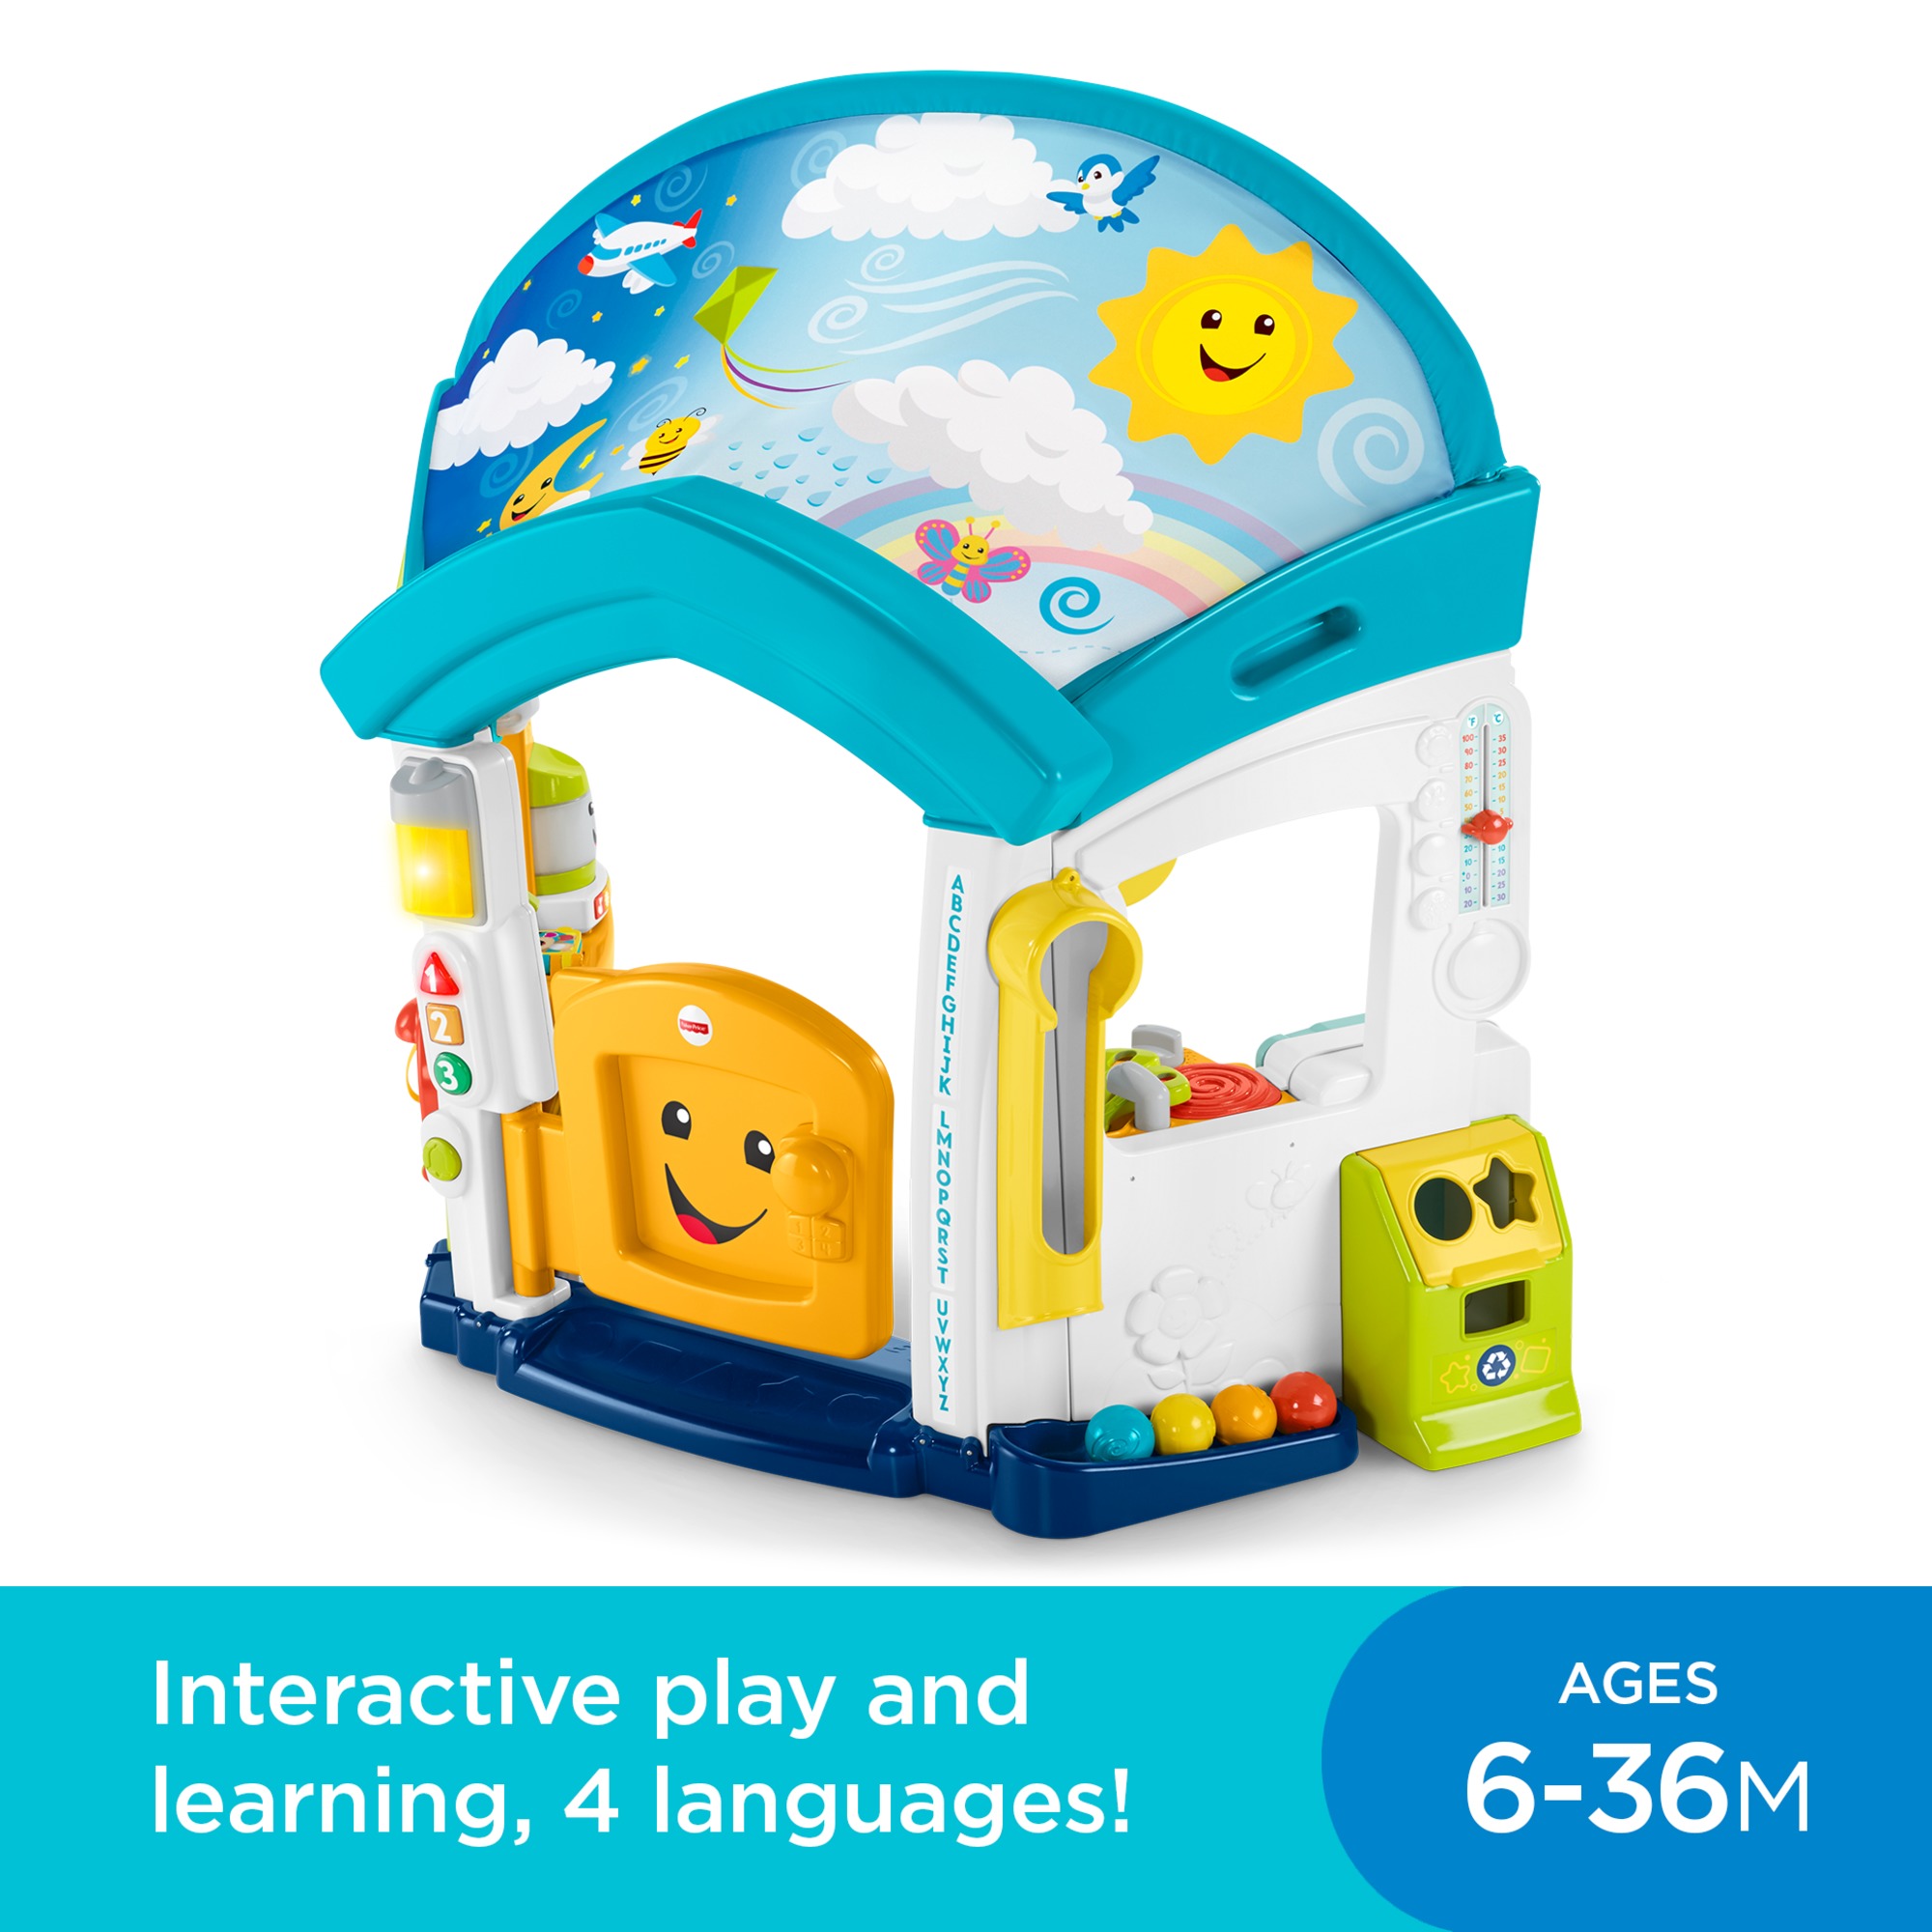 Fisher-Price Laugh & Learn Playhouse Educational Toy for Babies & Toddlers, Smart Learning Home - image 14 of 25